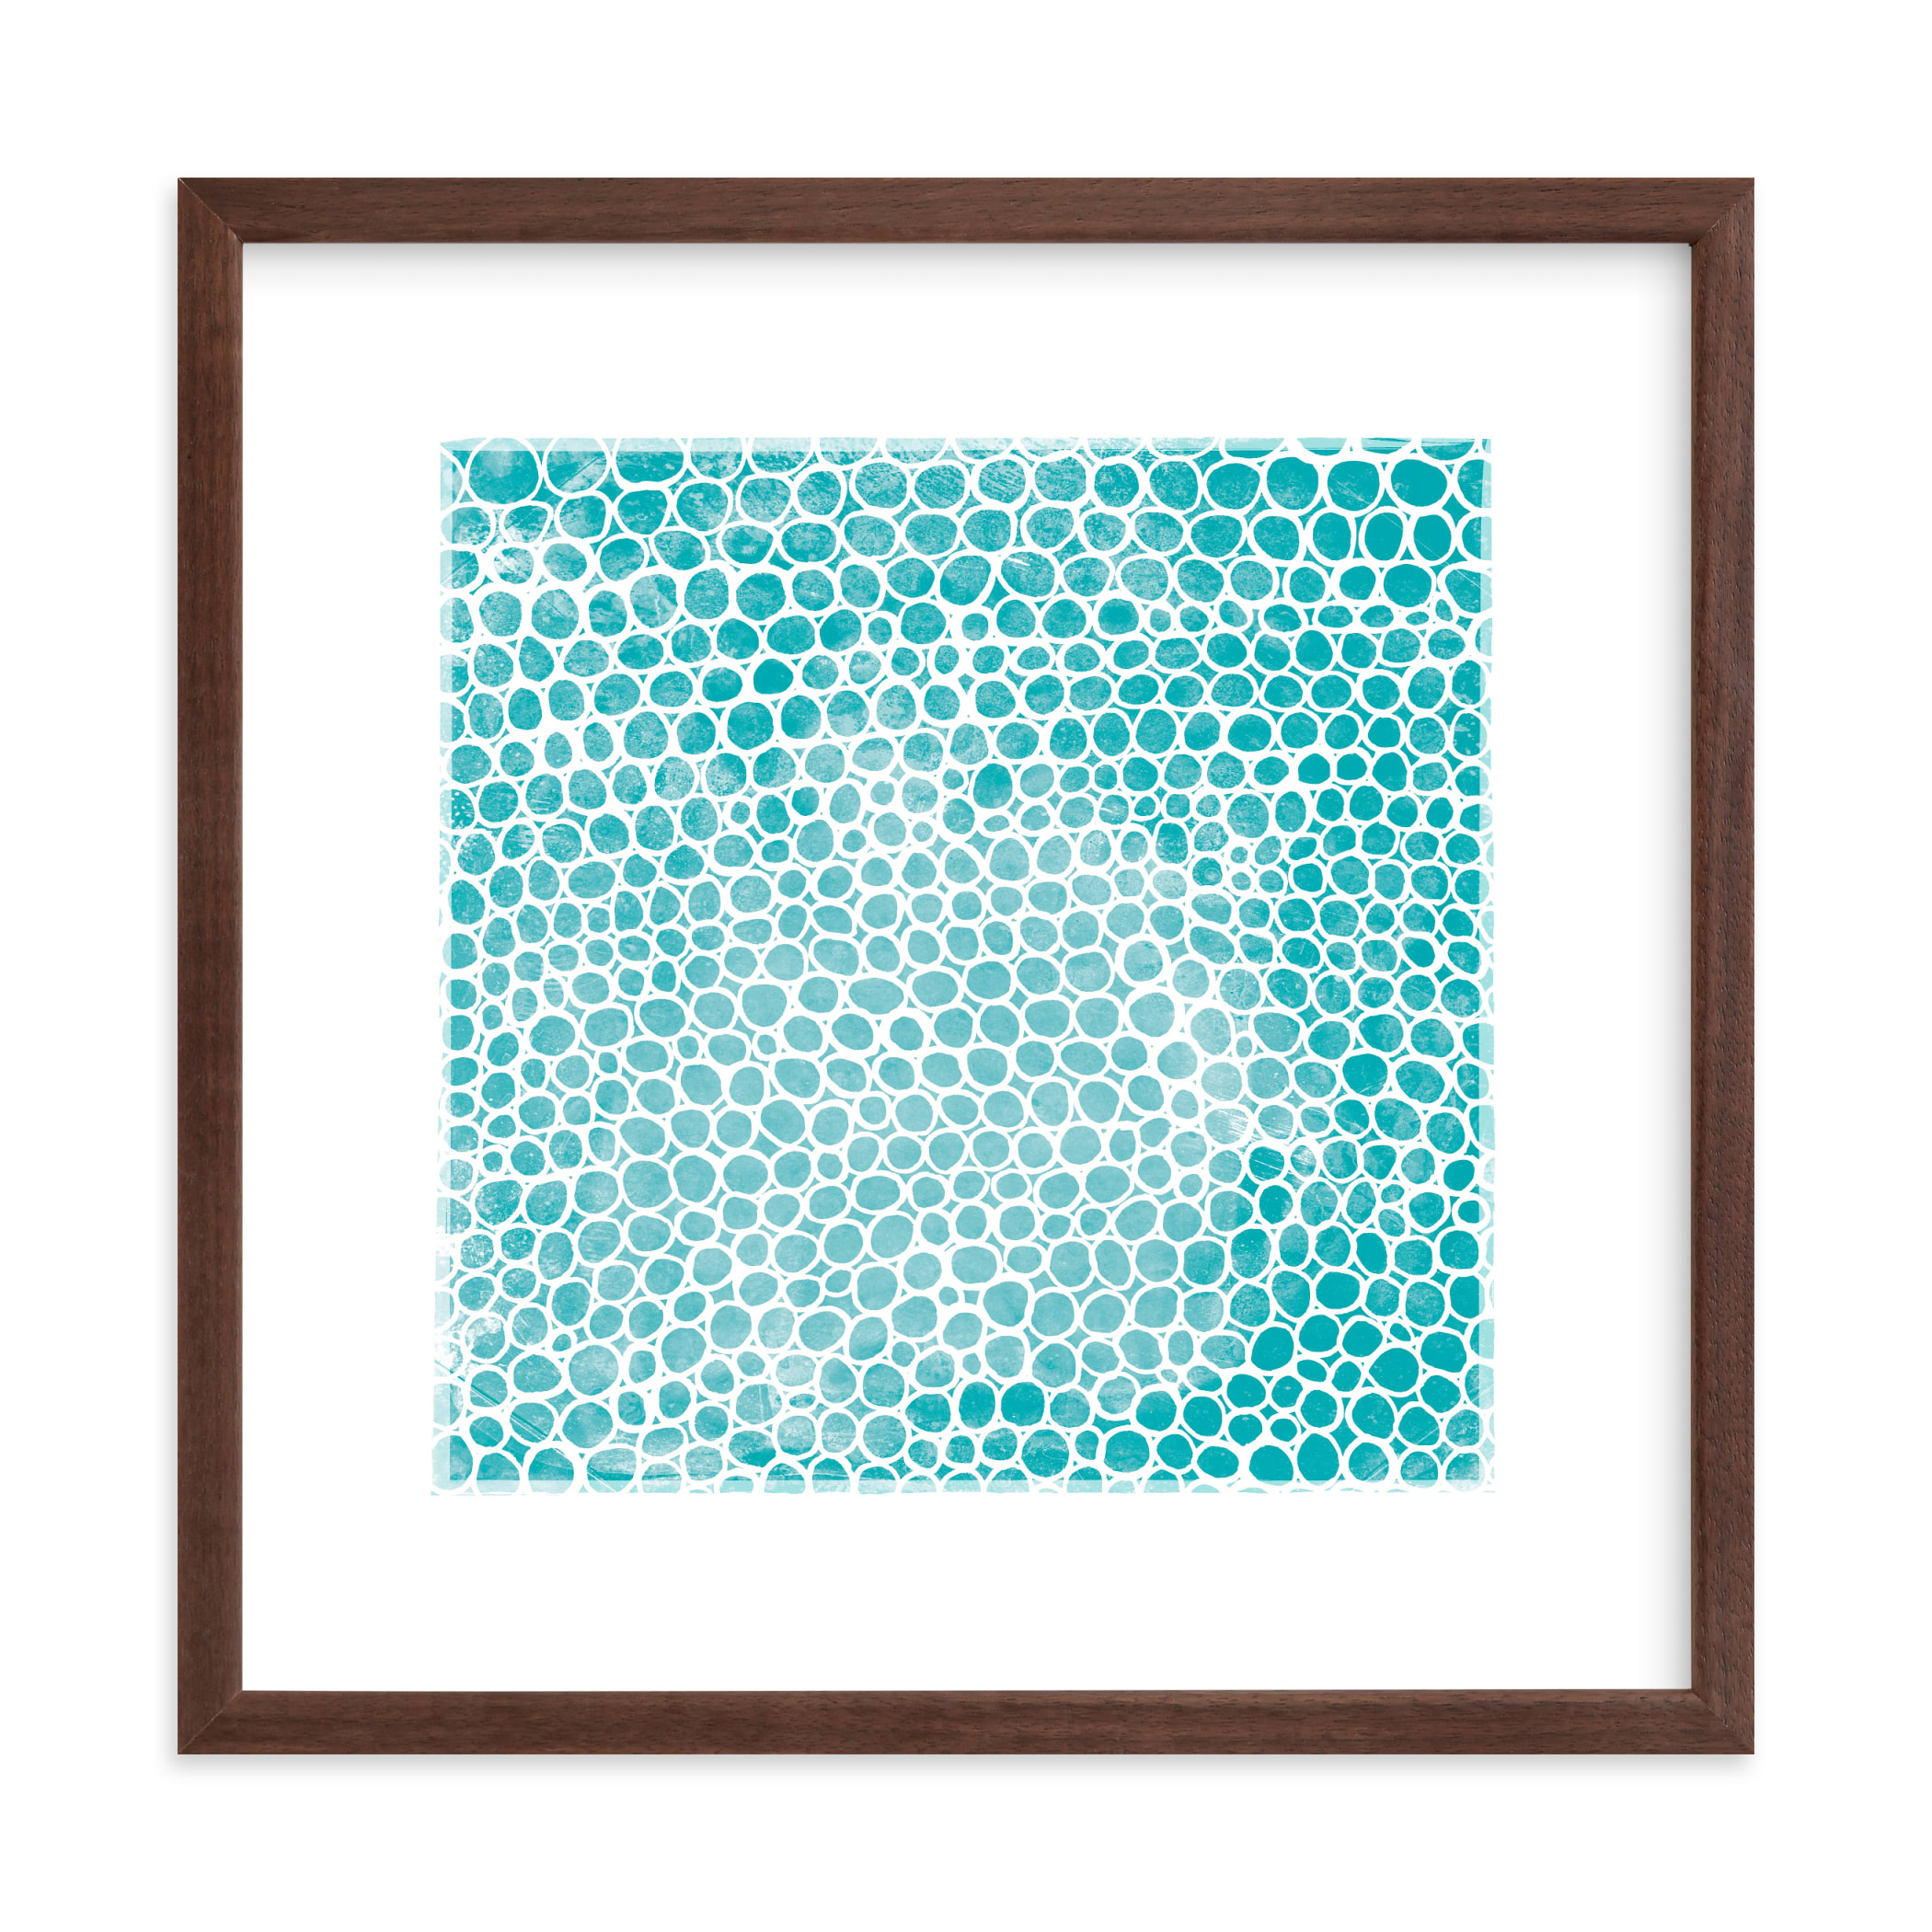 Abstract Circles Wall Art Prints by Kerry Doyle - Paper Dahlia | Minted